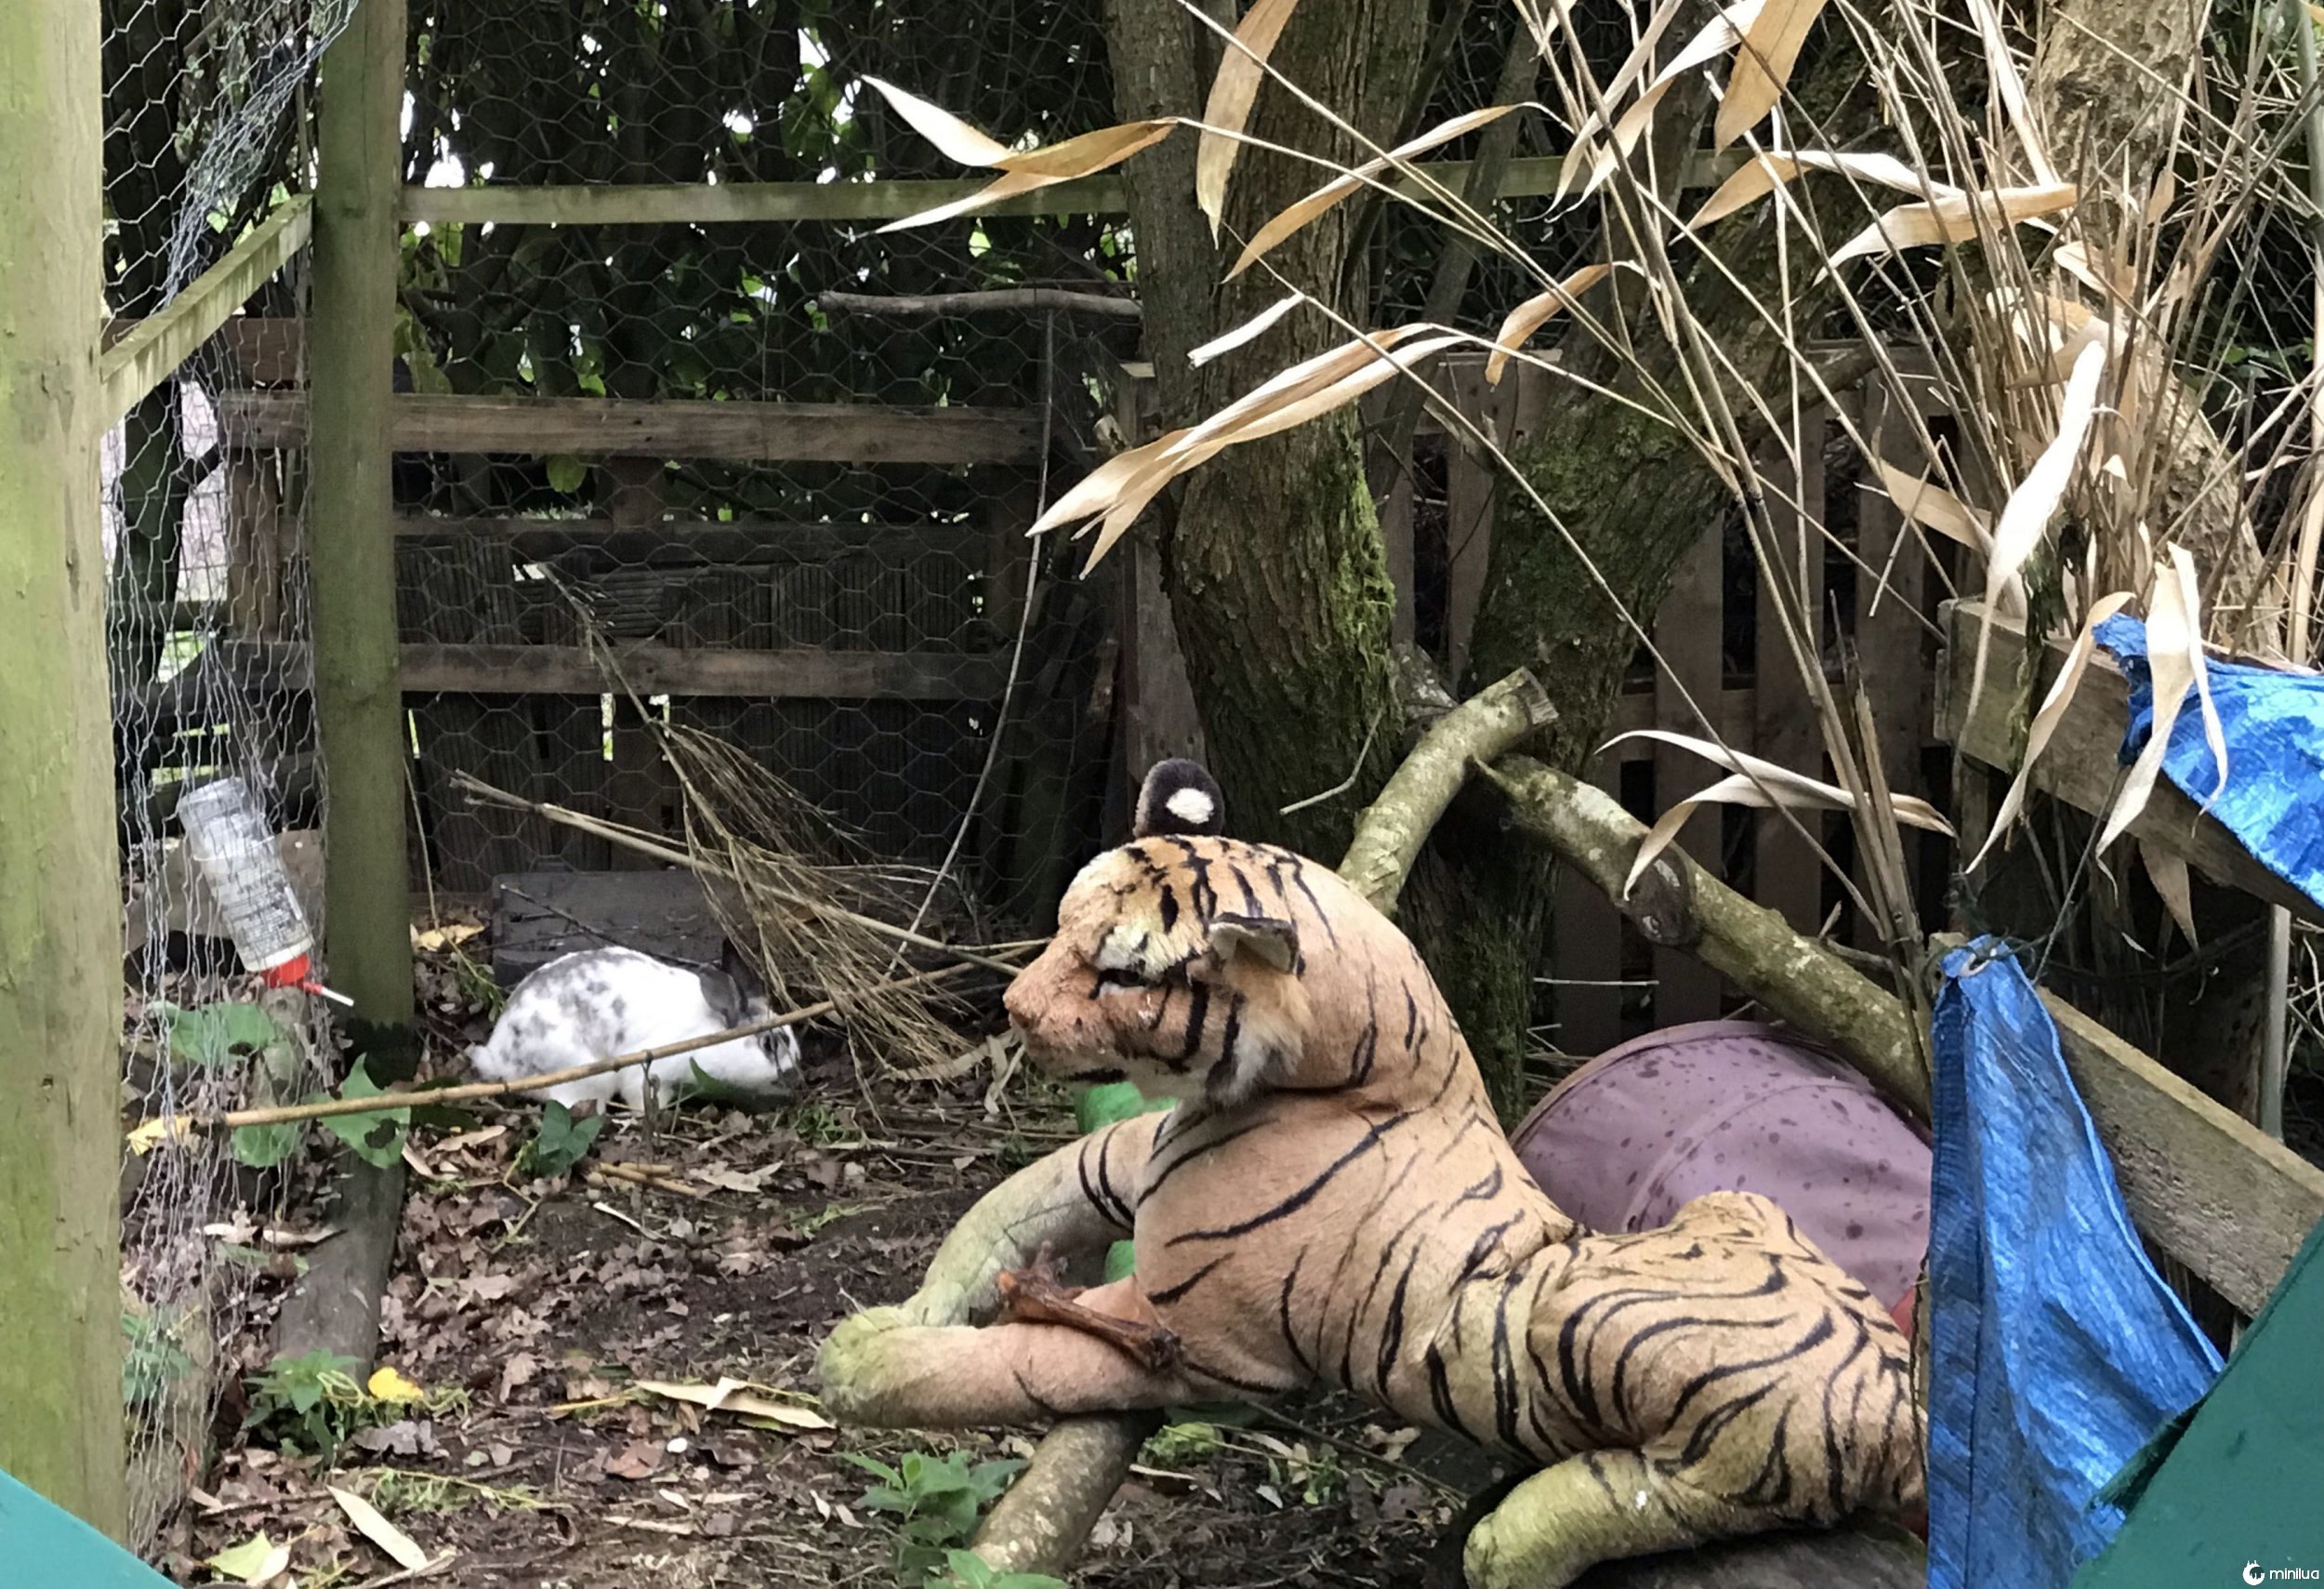 Undated handout photo issued by the RSPCA of a tiger soft toy, one of the funnier calls the RSPCA had in 2019. PA Photo. Issue date: Sunday January 19, 2020. RSPCA inspector Marije Zwager couldn?t believe it when she received a call on 10 May reporting a tiger being kept in a cramped cage in a garden near Exeter, Devon. Inspector Zwager said: ?The person who called us was concerned as they claimed they?d seen a tiger in a cage in a garden. They were persistent this is what they?d seen and I wasn?t quite sure what to expect but soon realised that it wasn?t a tiger at all, it was just a soft toy. The owner could really see the fun side too, He?s called Tiddles the Tiger and shares his home with two male neutered rabbits called Horace and Boris, who have a fantastic home filled with all kinds of enrichment and entertainment to keep them happy and healthy. From a distance it was difficult to see what was in the cage so I don?t blame the caller for getting in touch, it?s good to know that there are people out there who are looking out for animals. We really appreciate all the calls we get telling us about animals in distress. Members of the public are certainly our eyes and our ears.?. Photo credit should read: RSPCA/PA Wire NOTE TO EDITORS: This handout photo may only be used in for editorial reporting purposes for the contemporaneous illustration of events, things or the people in the image or facts mentioned in the caption. Reuse of the picture may require further permission from the copyright holder.